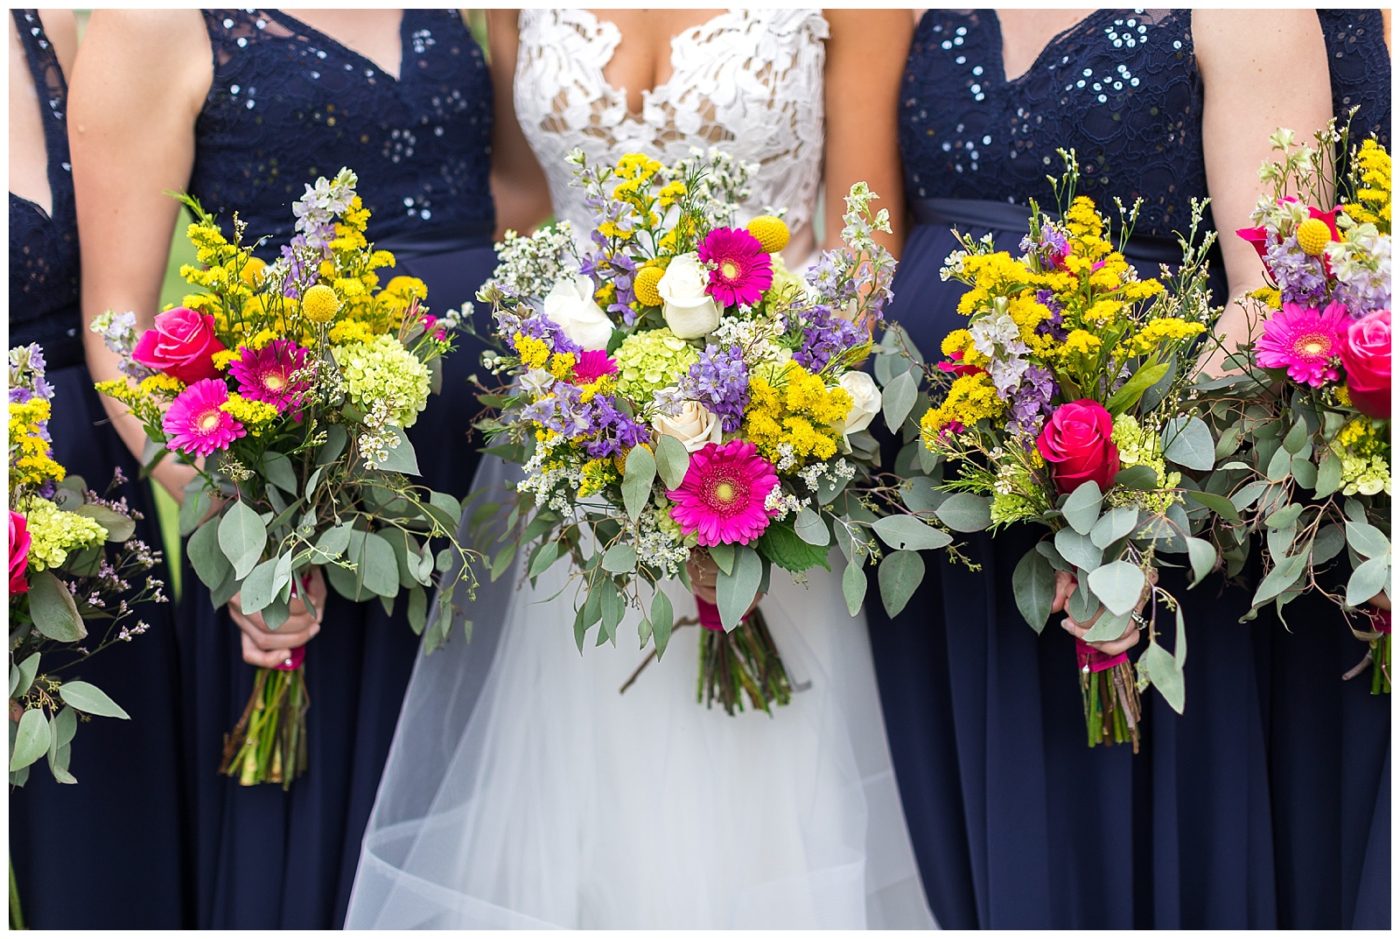 Bridesmaids standing while holding their flower bouquets against their dresses